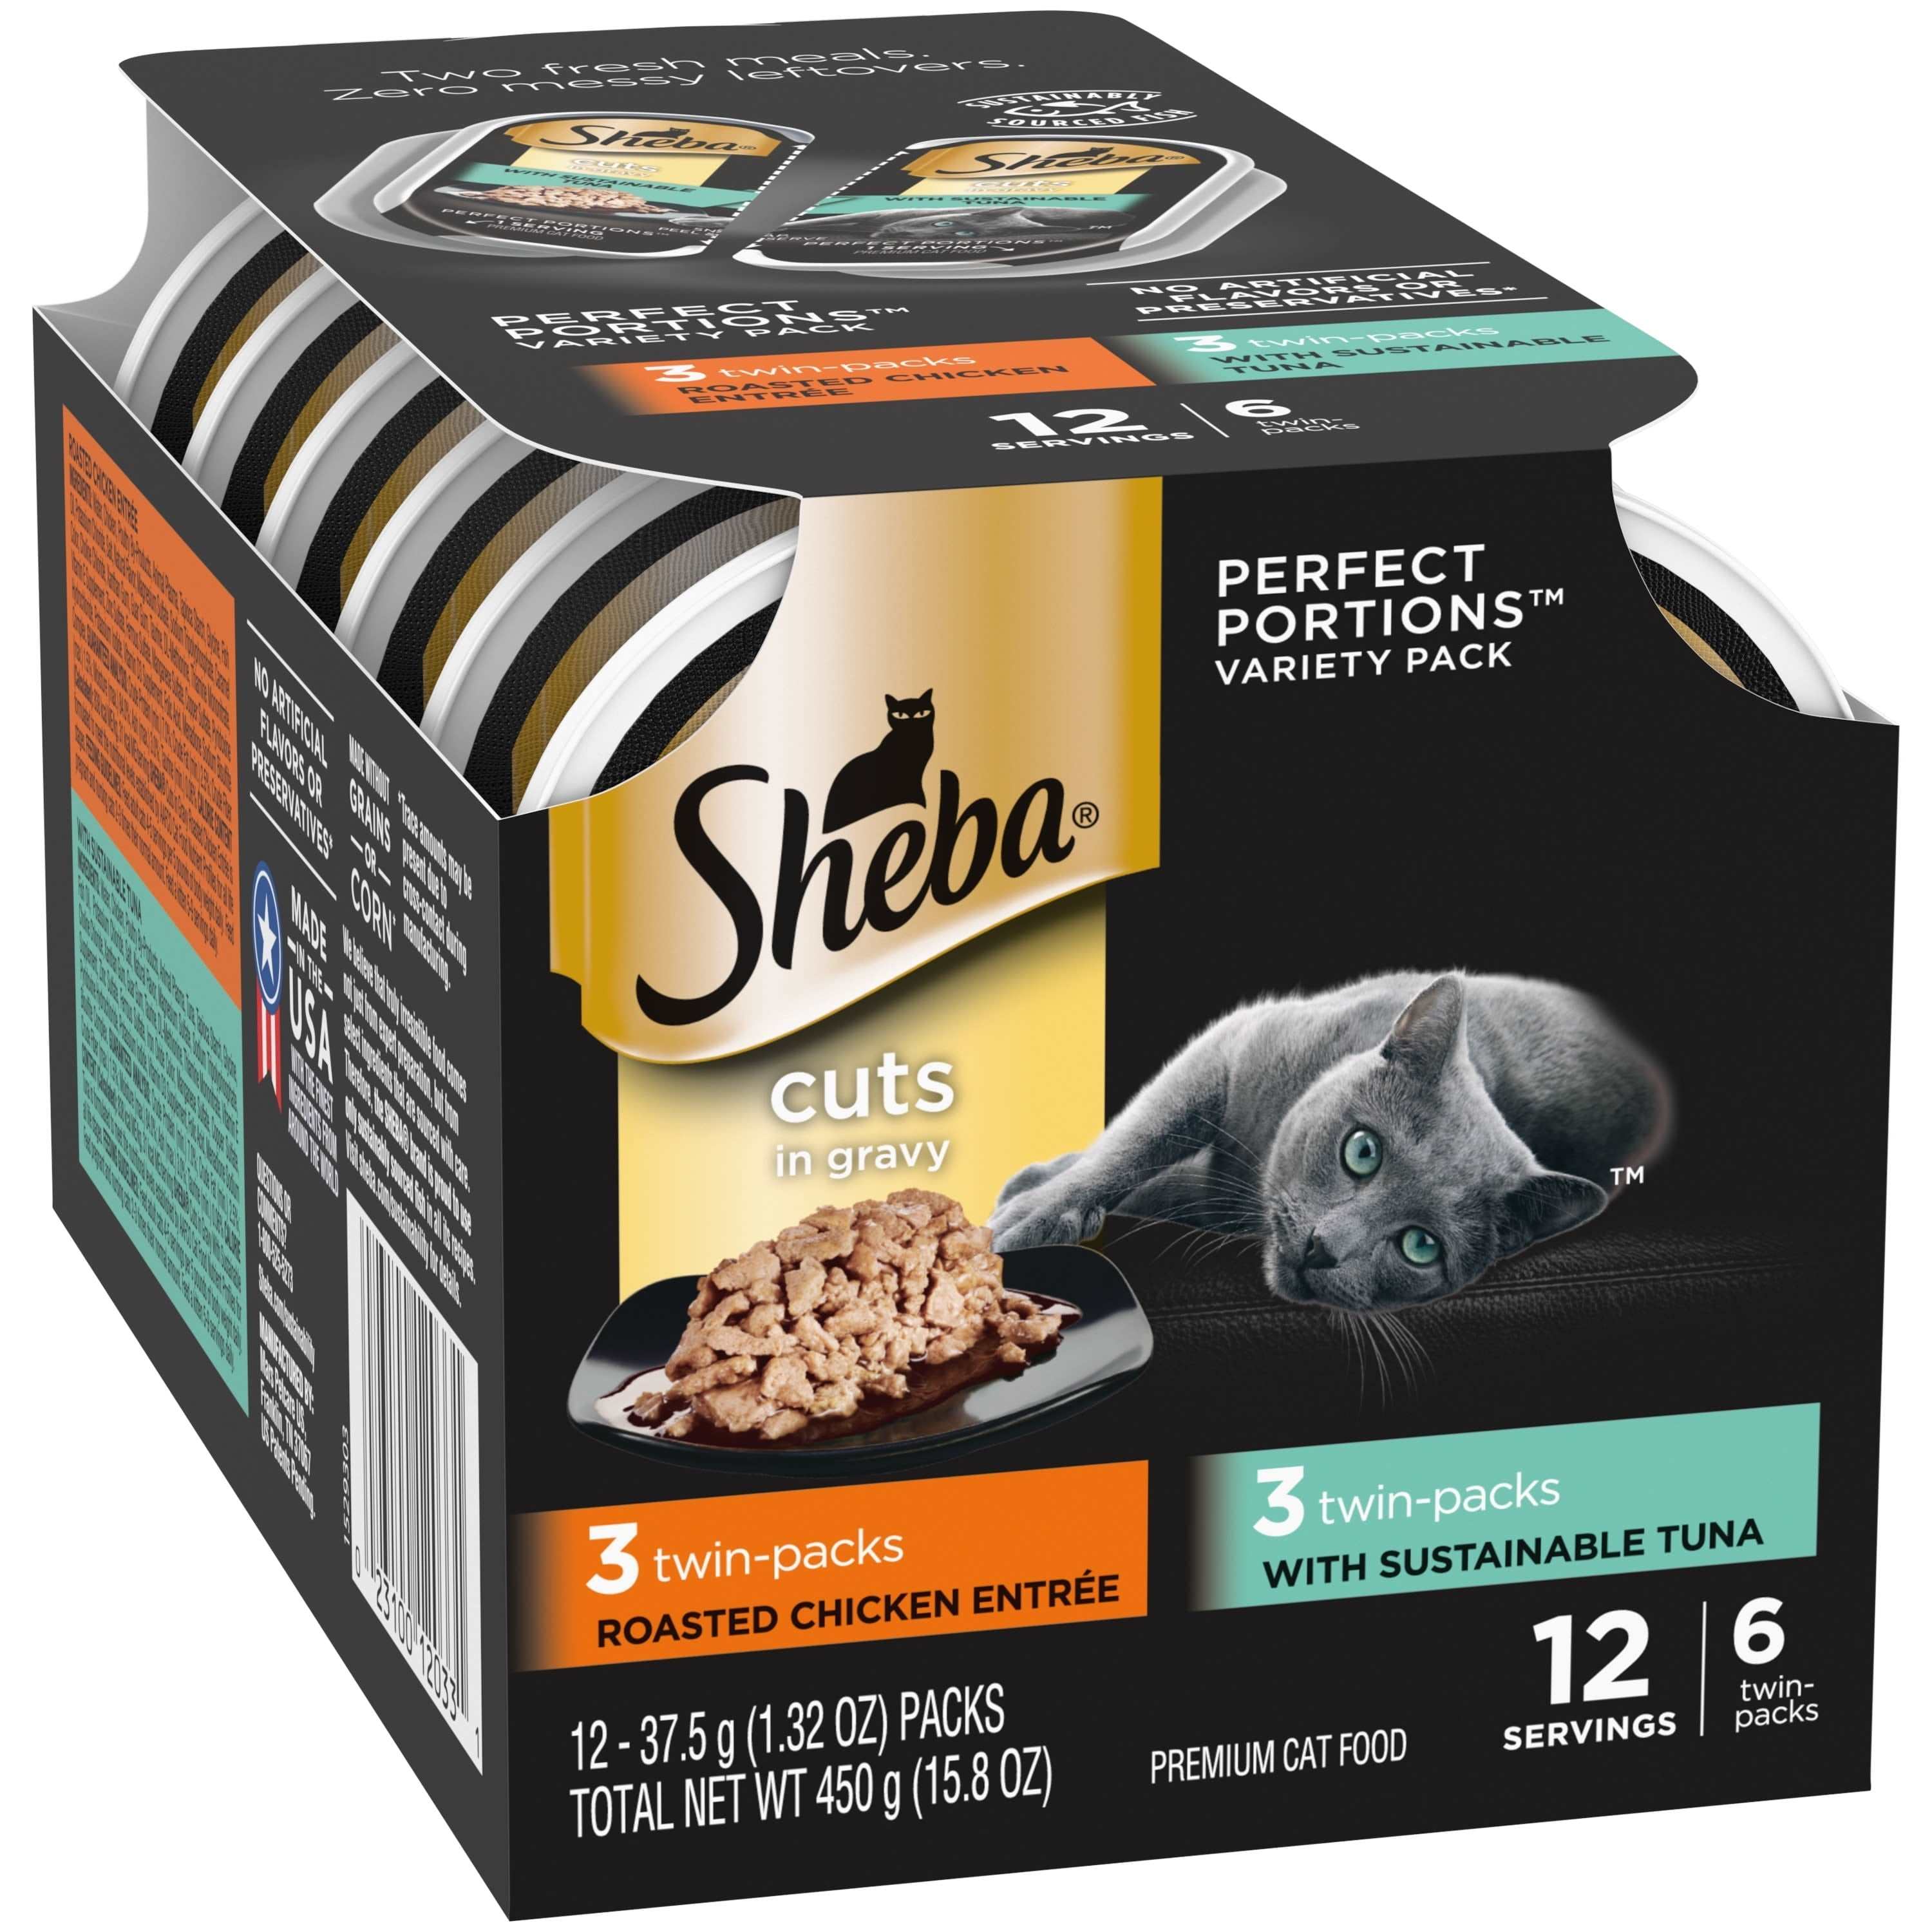 Wholesale prices with free shipping all over United States SHEBA Wet Cat Food Cuts in Gravy Variety Pack, With Sustainable Tuna and Roasted Chicken Entree, (6) 2.6 oz. PERFECT PORTIONS Twin-Pack Trays - Steven Deals